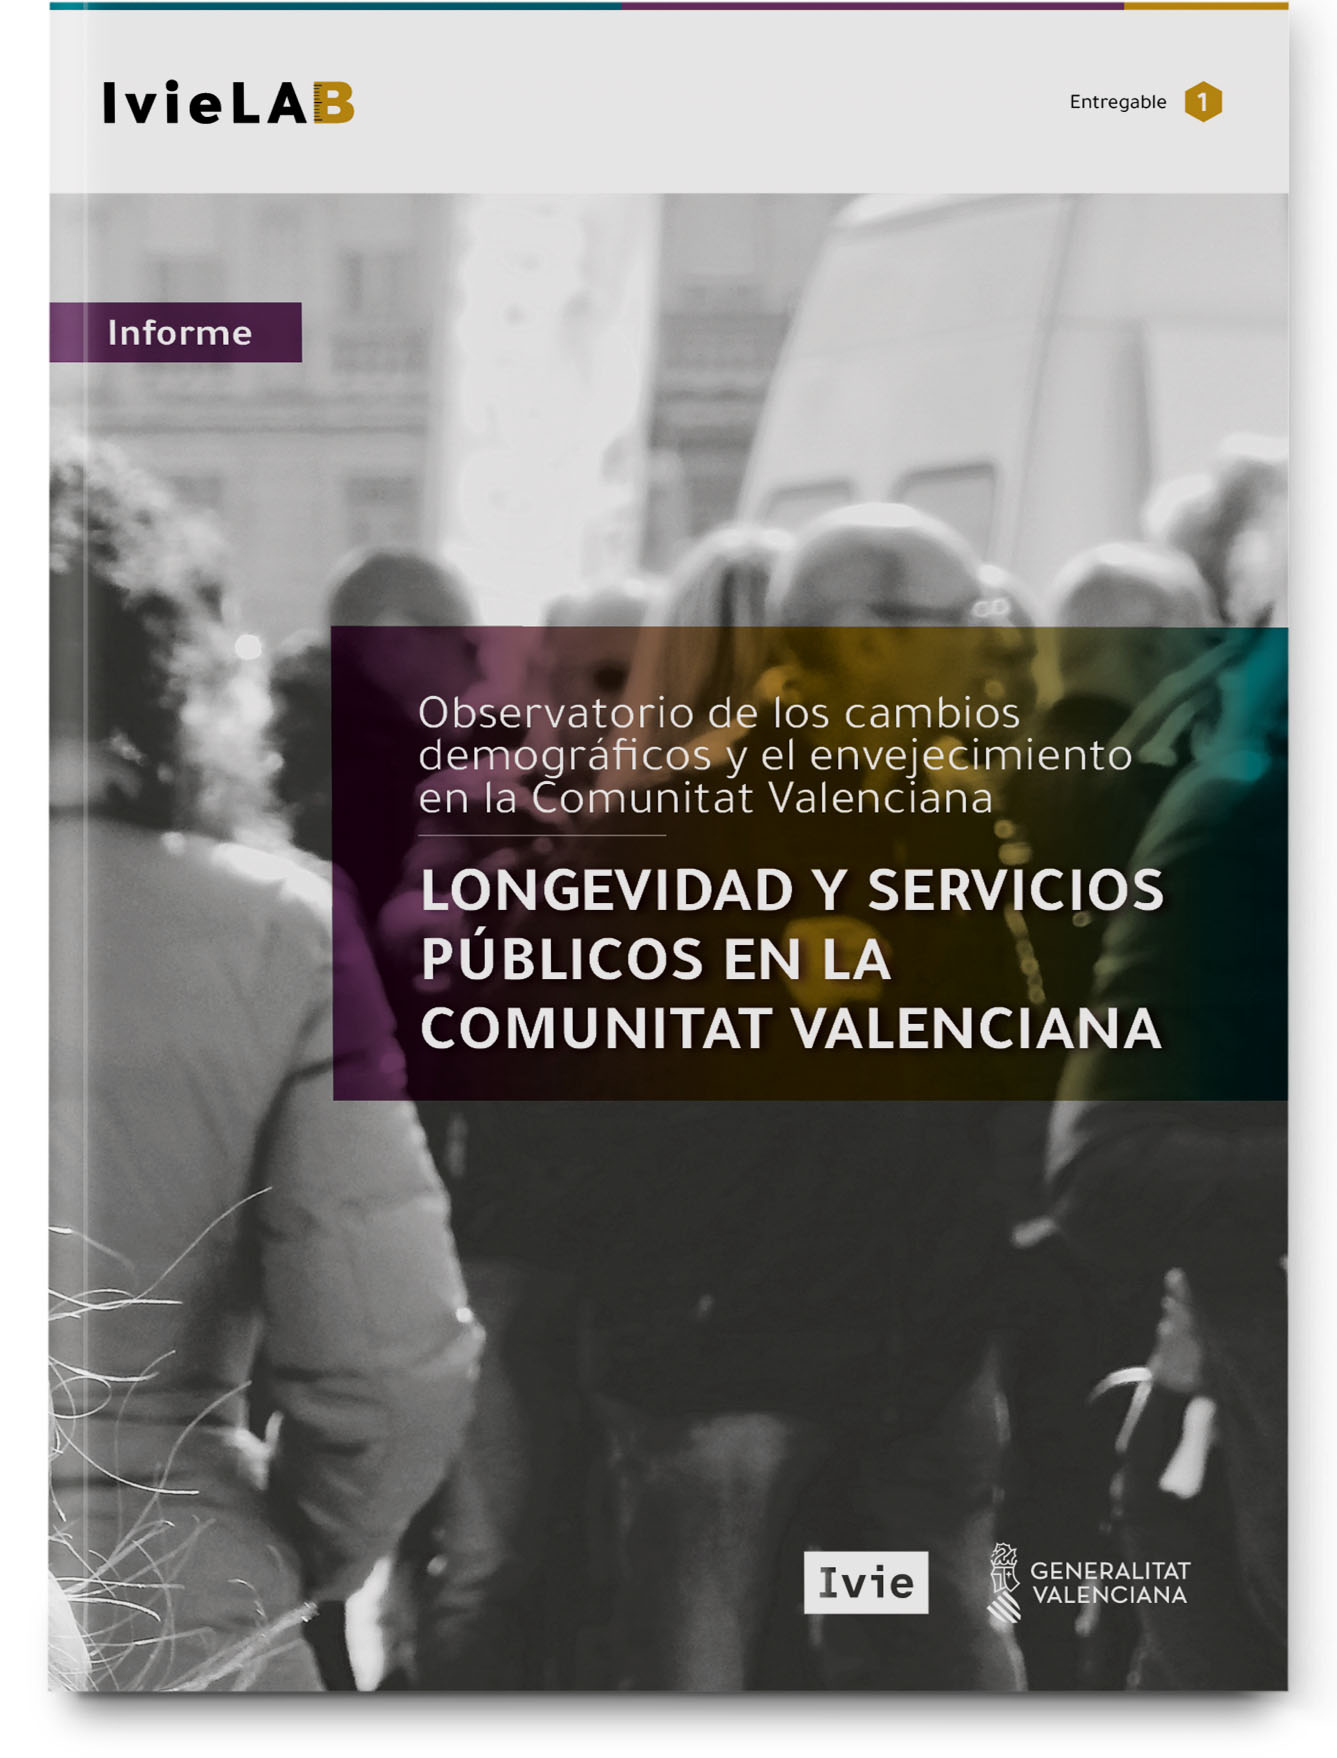 Longevity and public services in the Valencian Community